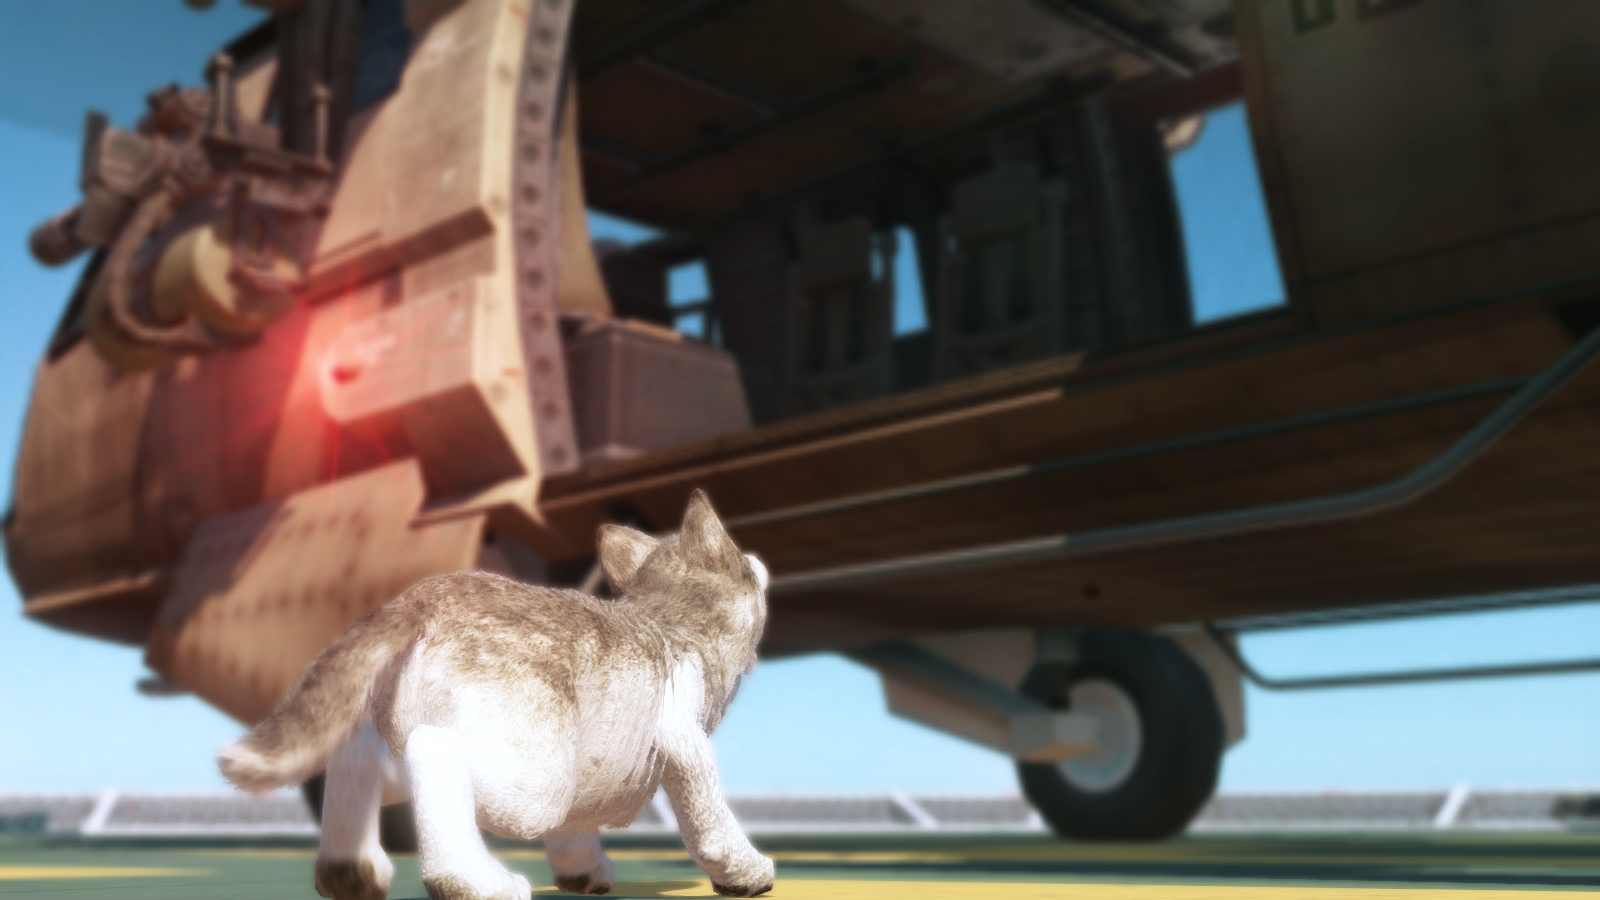 General 1600x900 Metal Gear Solid V: The Phantom Pain Metal Gear video games dog animals mammals screen shot helicopters